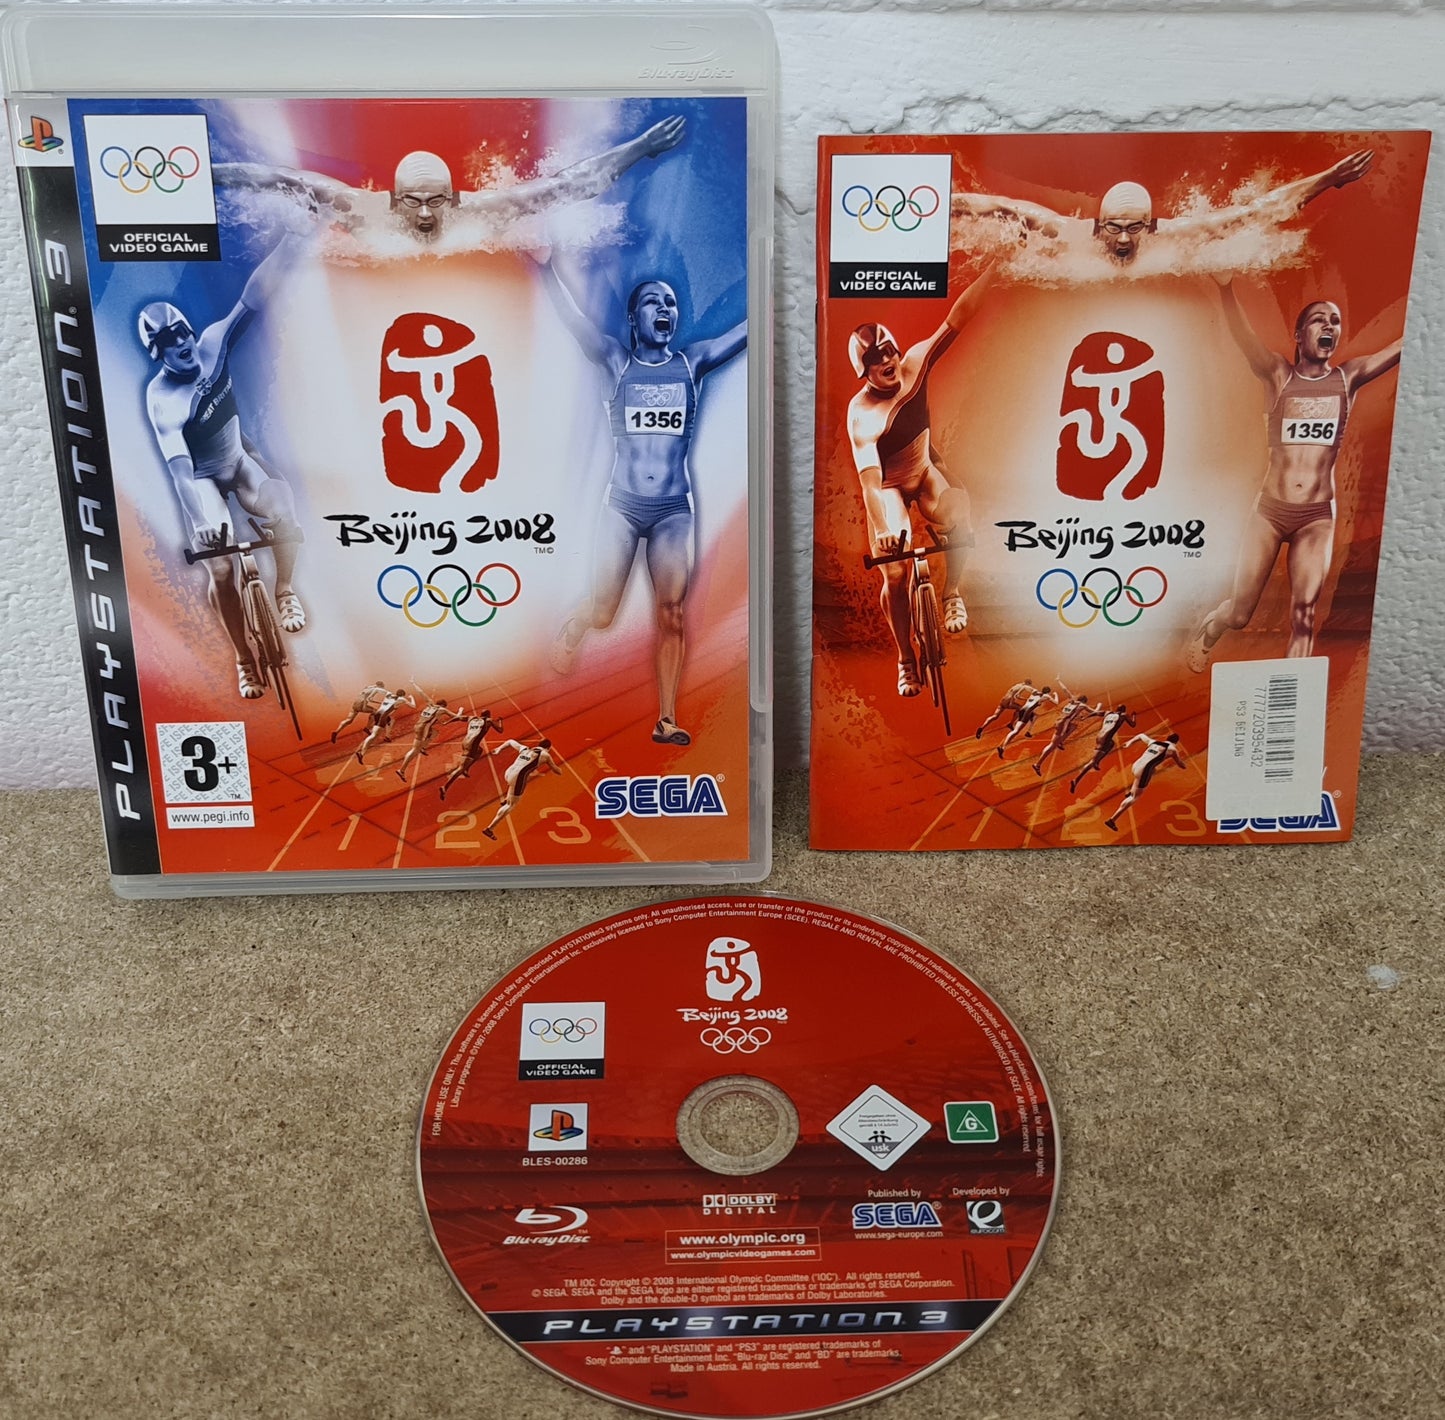 Beijing 2008 Sony Playstation 3 (PS3) Game